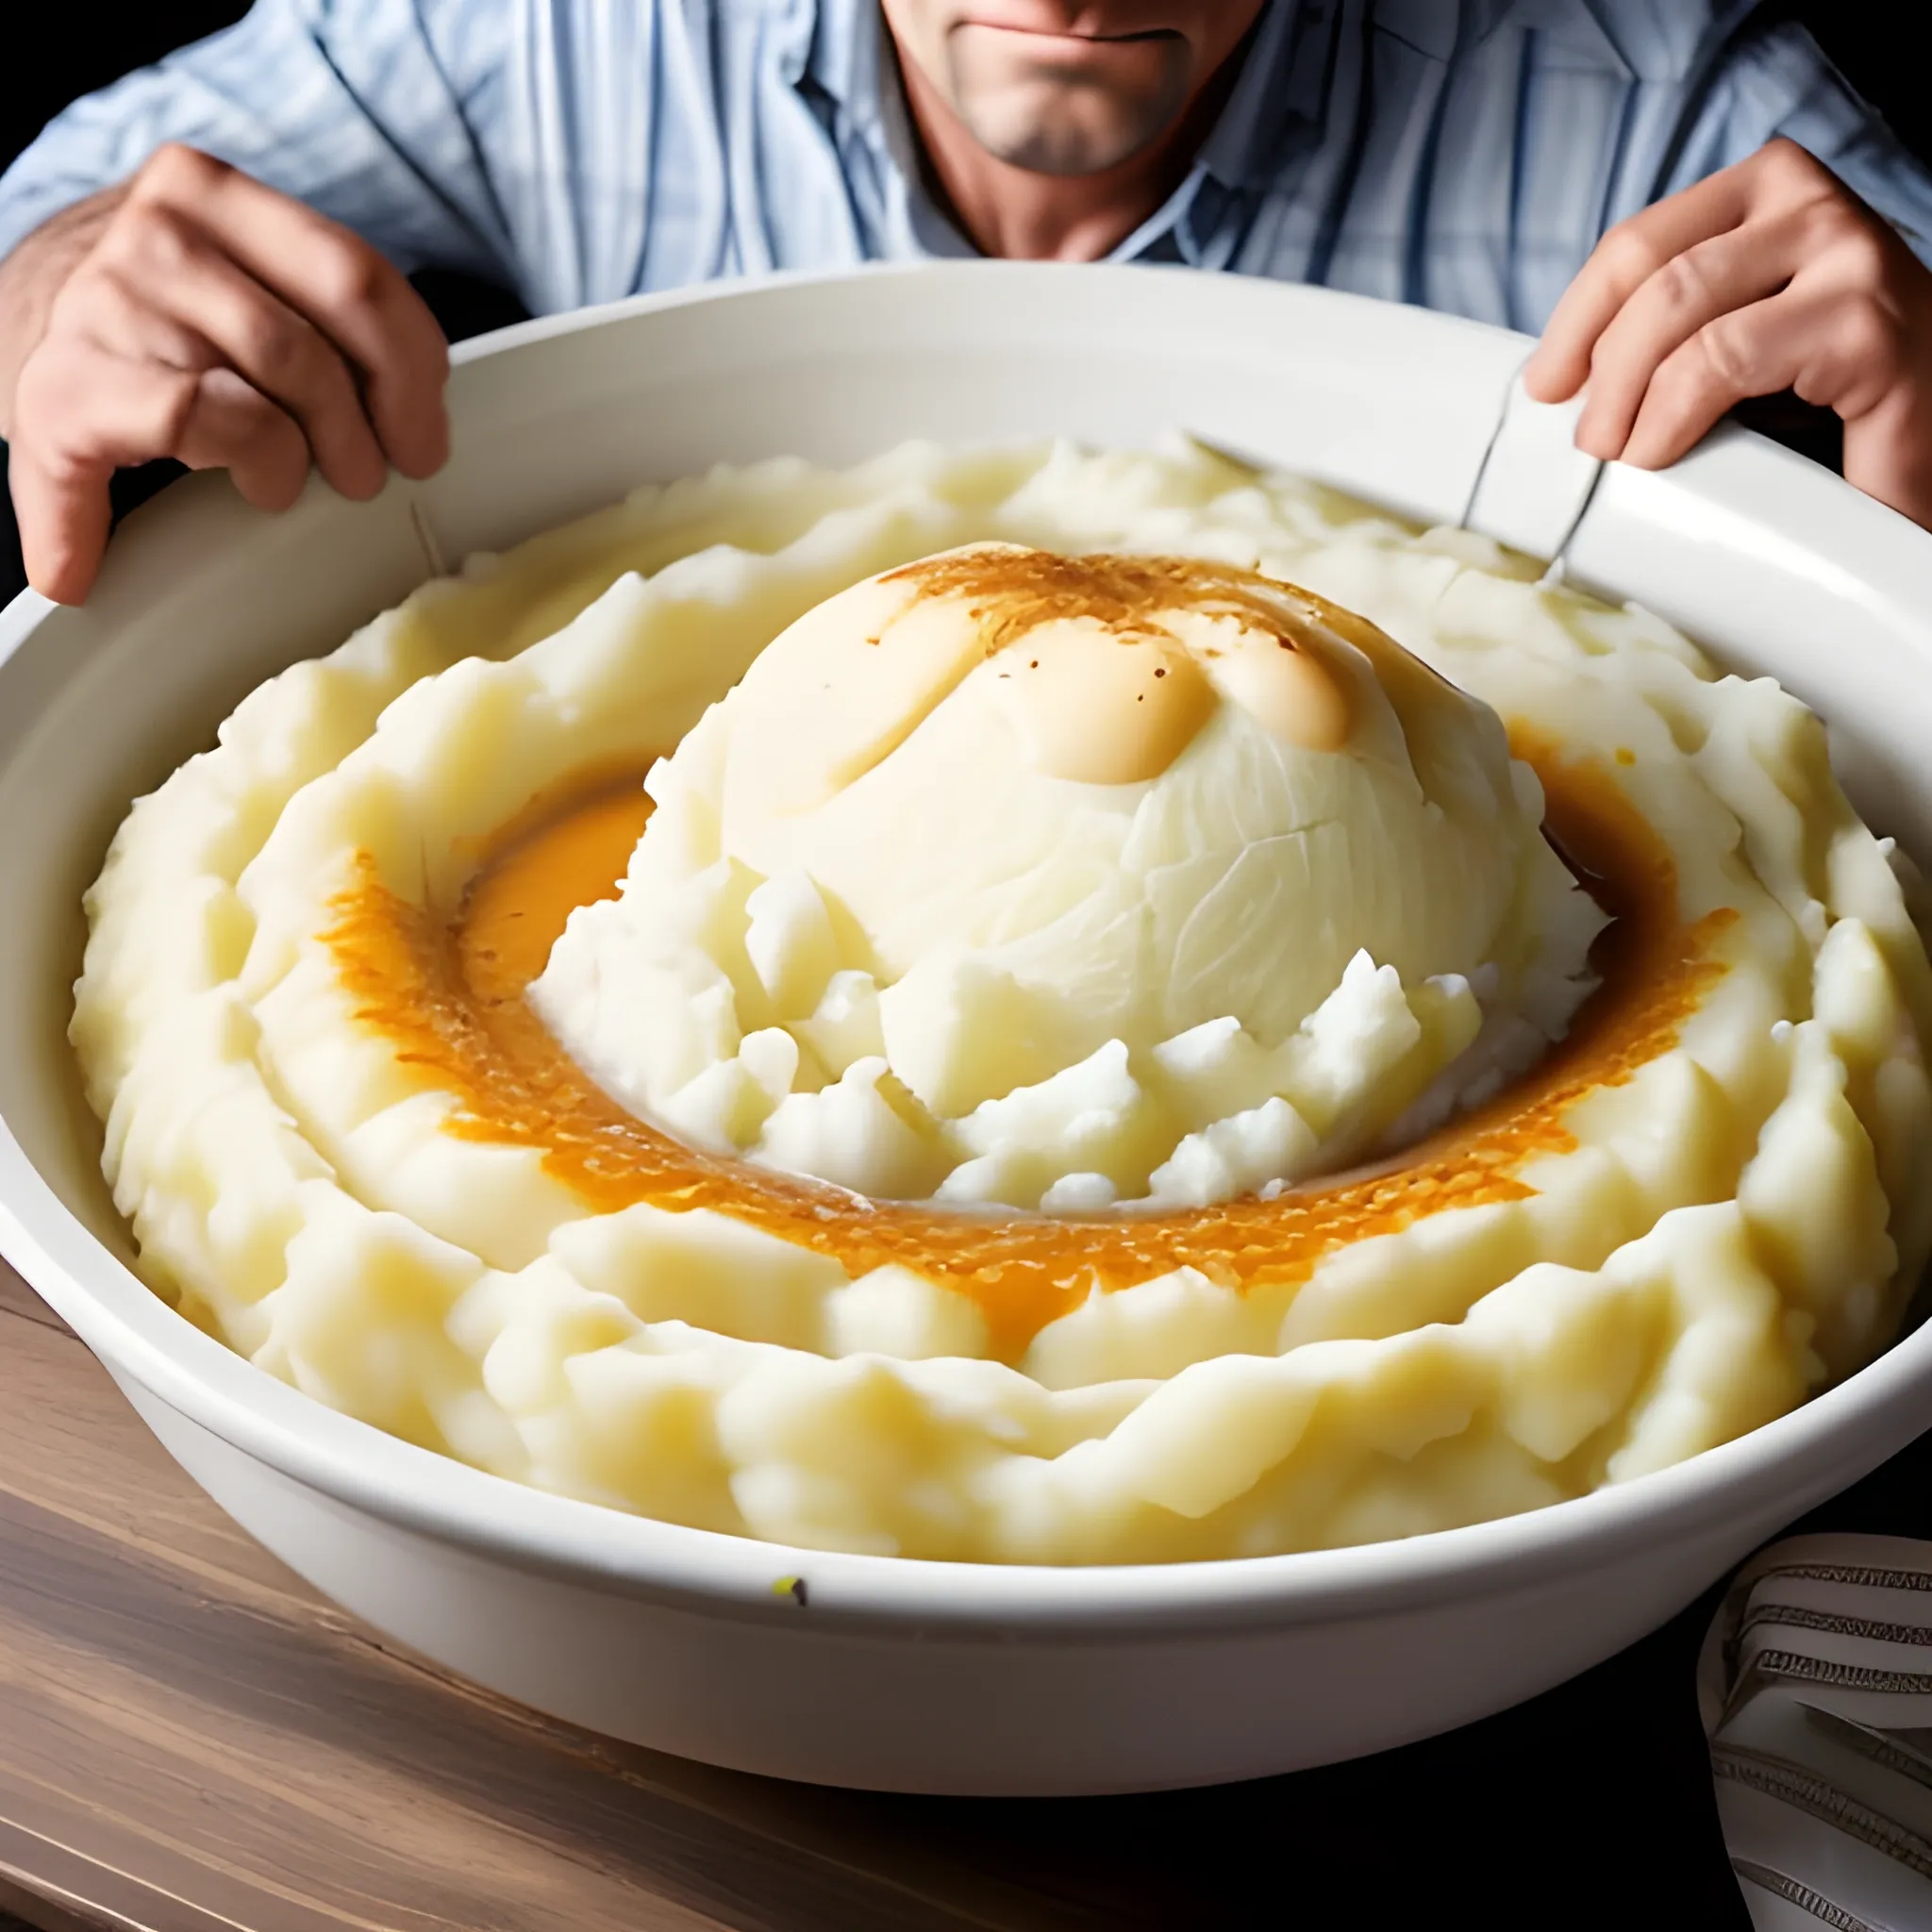 A man is swimming in a giant bowl of mashed potatoes and gravy